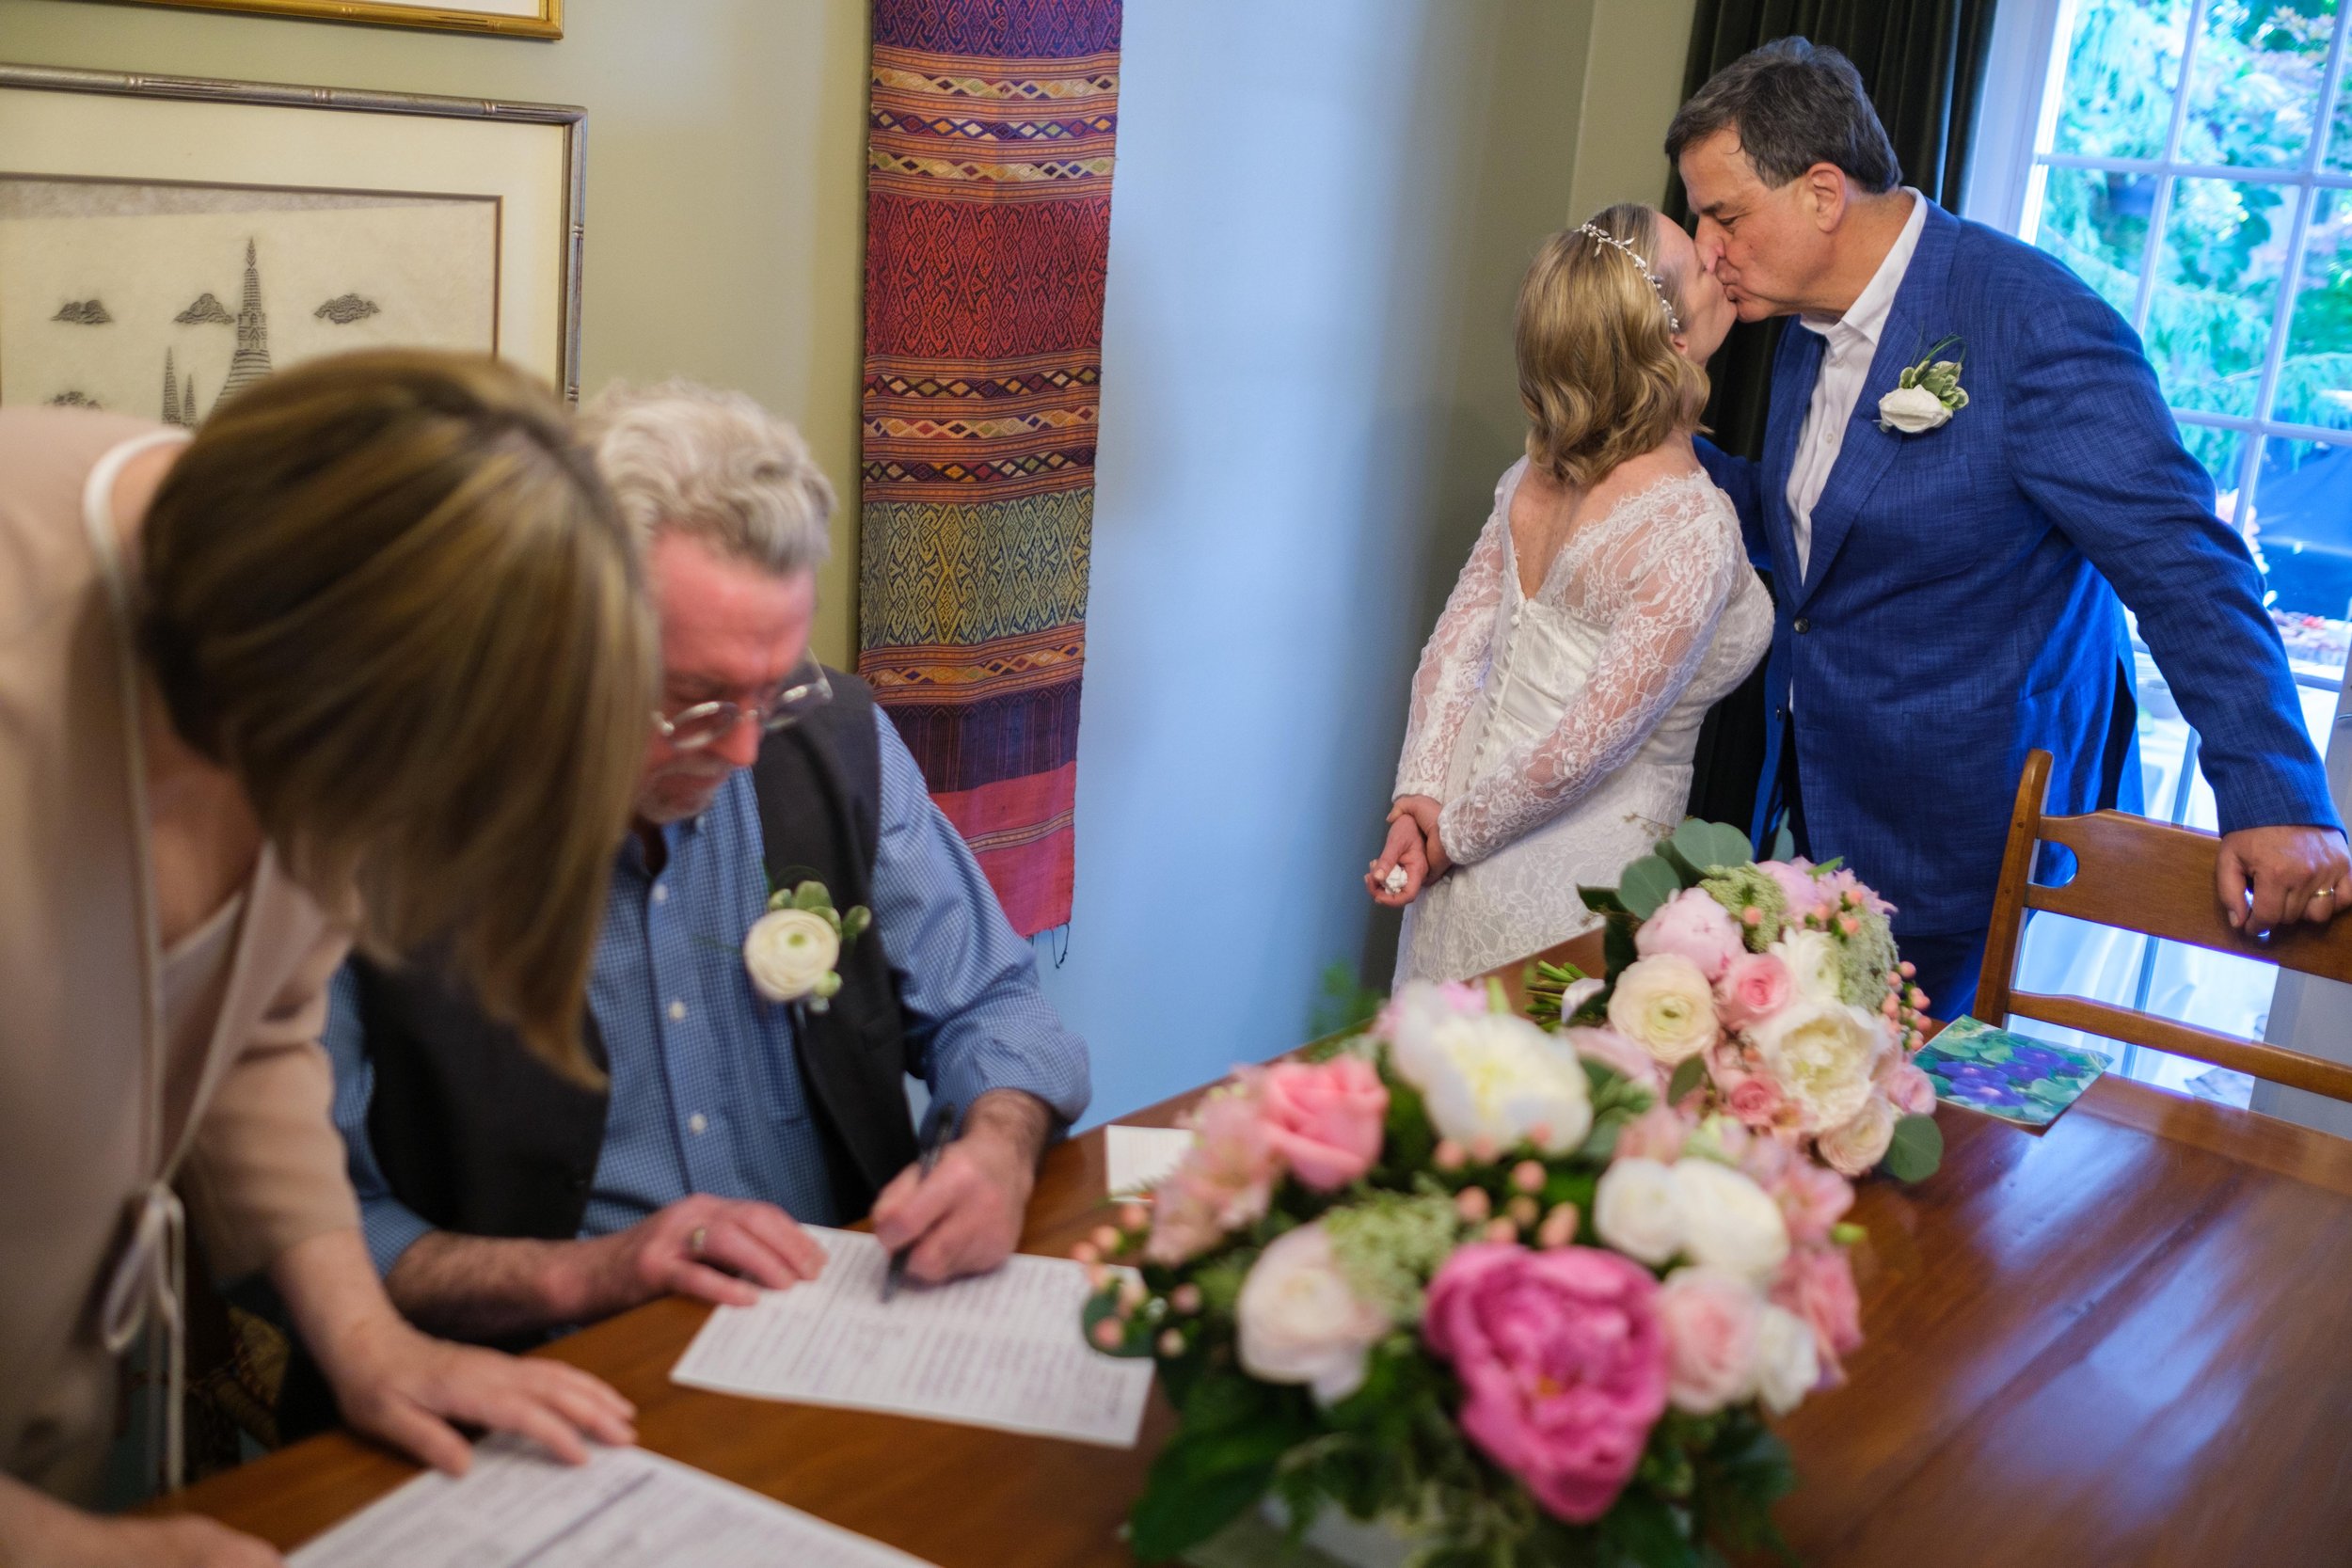  A colour candid wedding photograph from Katherine + Cameron’s wedding ceremony as their witness sign the marriage certificate during their intimate backyard wedding in Waterloo, Ontario by Toronto wedding photographer Scott Williams (www.scottwillia